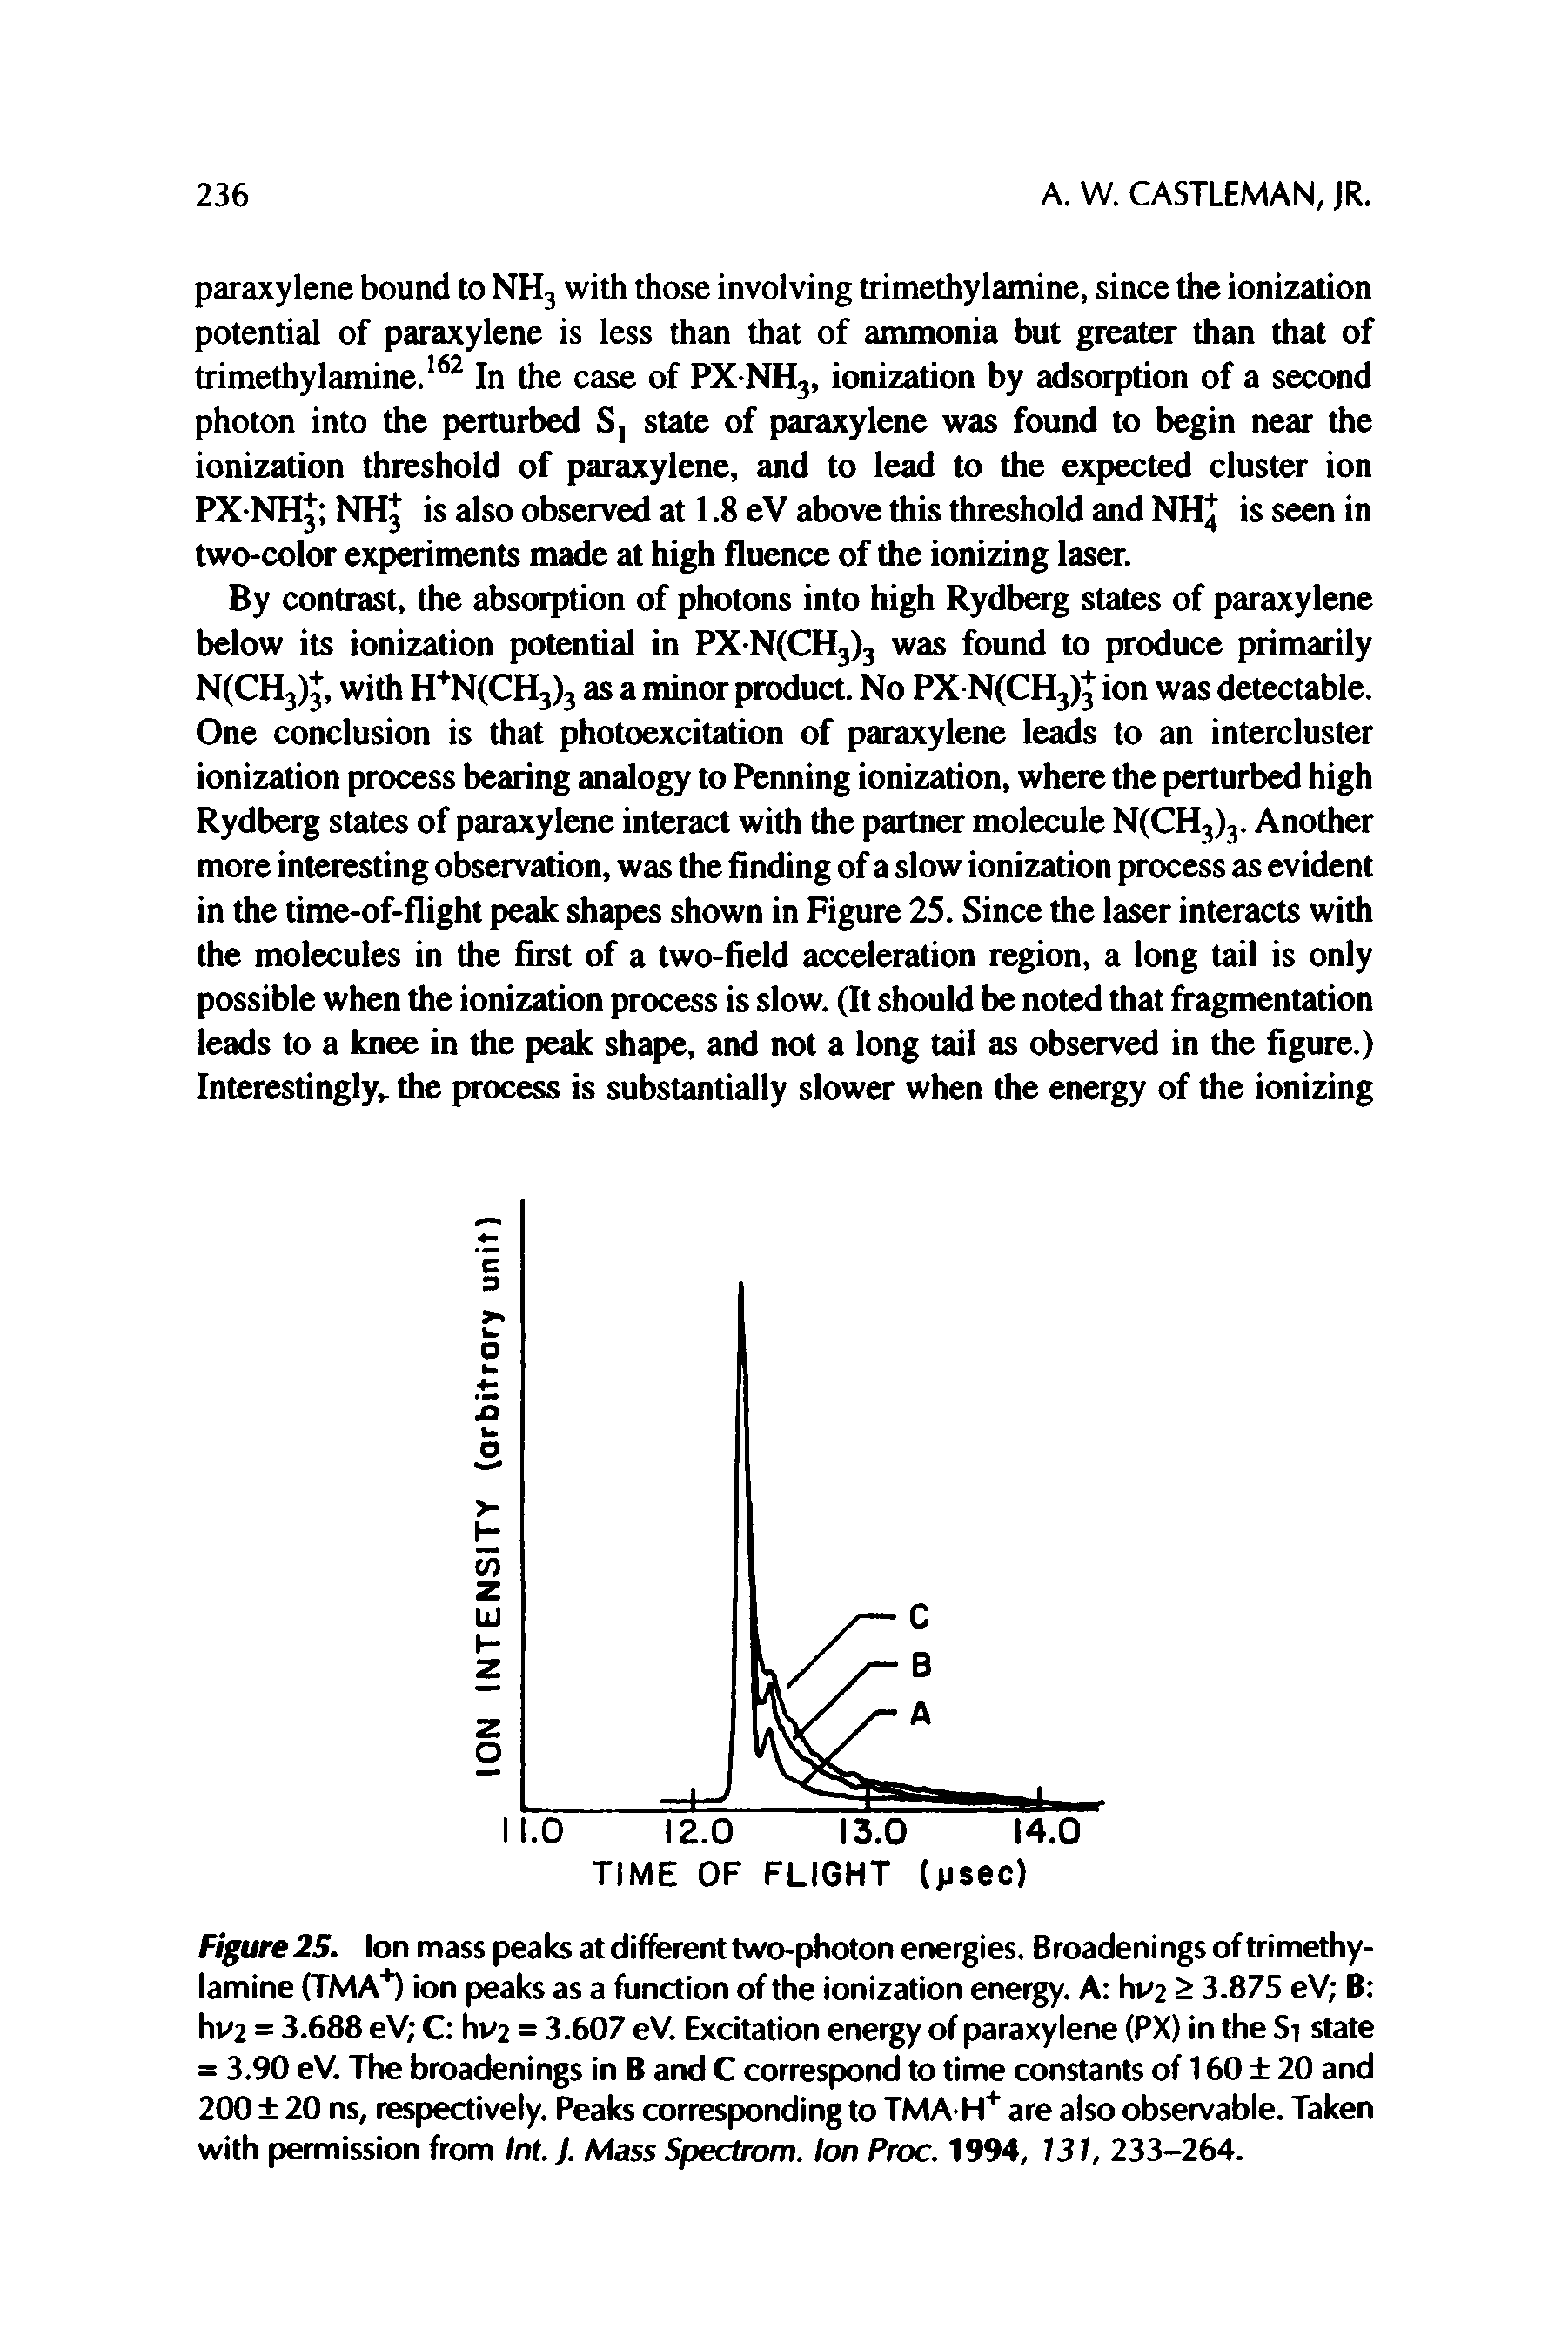 Figure 25. Ion mass peaks at different two-photon energies. Broadenings of trimethylamine (TMA ) ion peaks as a function of the ionization energy. A hv2 > 3.875 eV B hv2 = 3.688 eV C hv2 = 3.607 eV. Excitation energy of paraxylene (PX) in the Si state = 3.90 eV. The broadenings in B and C correspond to time constants of 160 20 and 200 20 ns, respectively. Peaks corresponding to TMA H+ are also observable. Taken with permission from Int. J. Mass Spectrom. Ion Proc. 1994, 131, 233-264.